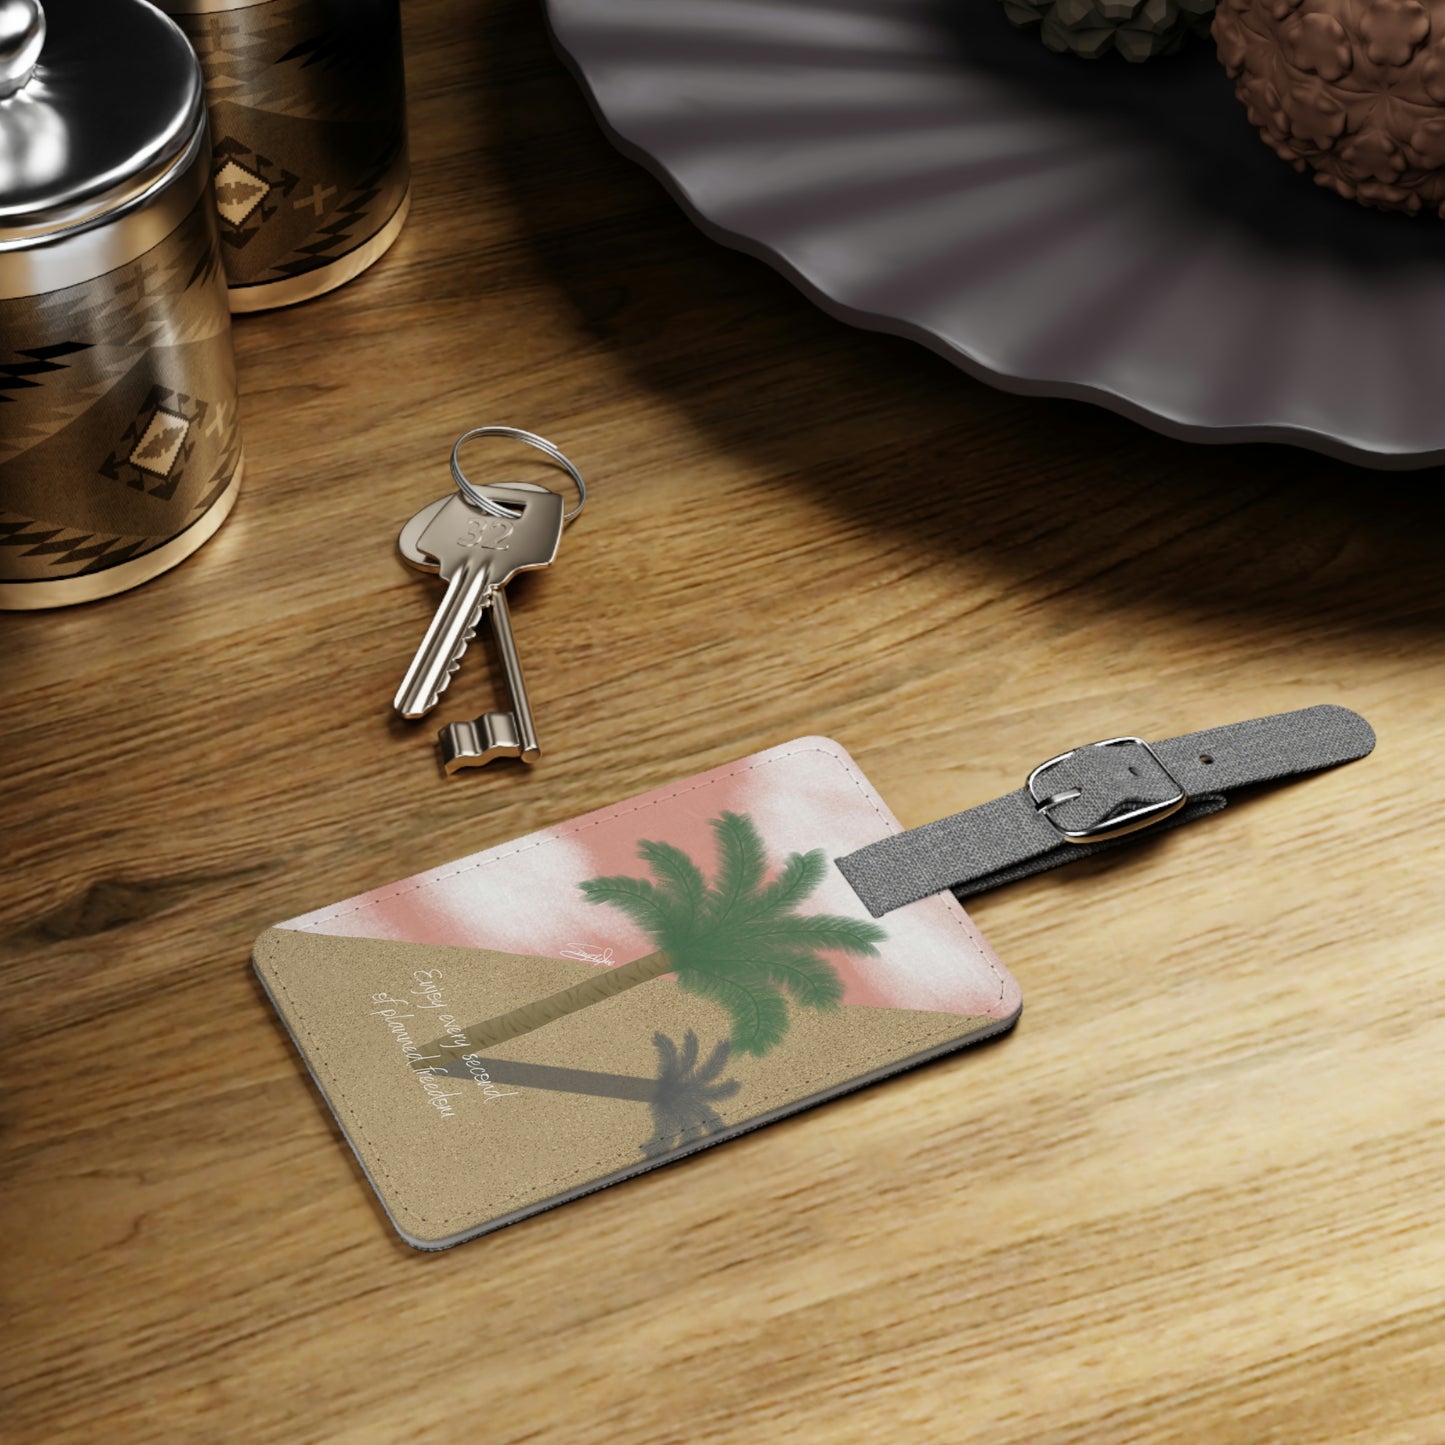 Enjoy every second of planned freedom - Saffiano Polyester Luggage Tag, Rectangle